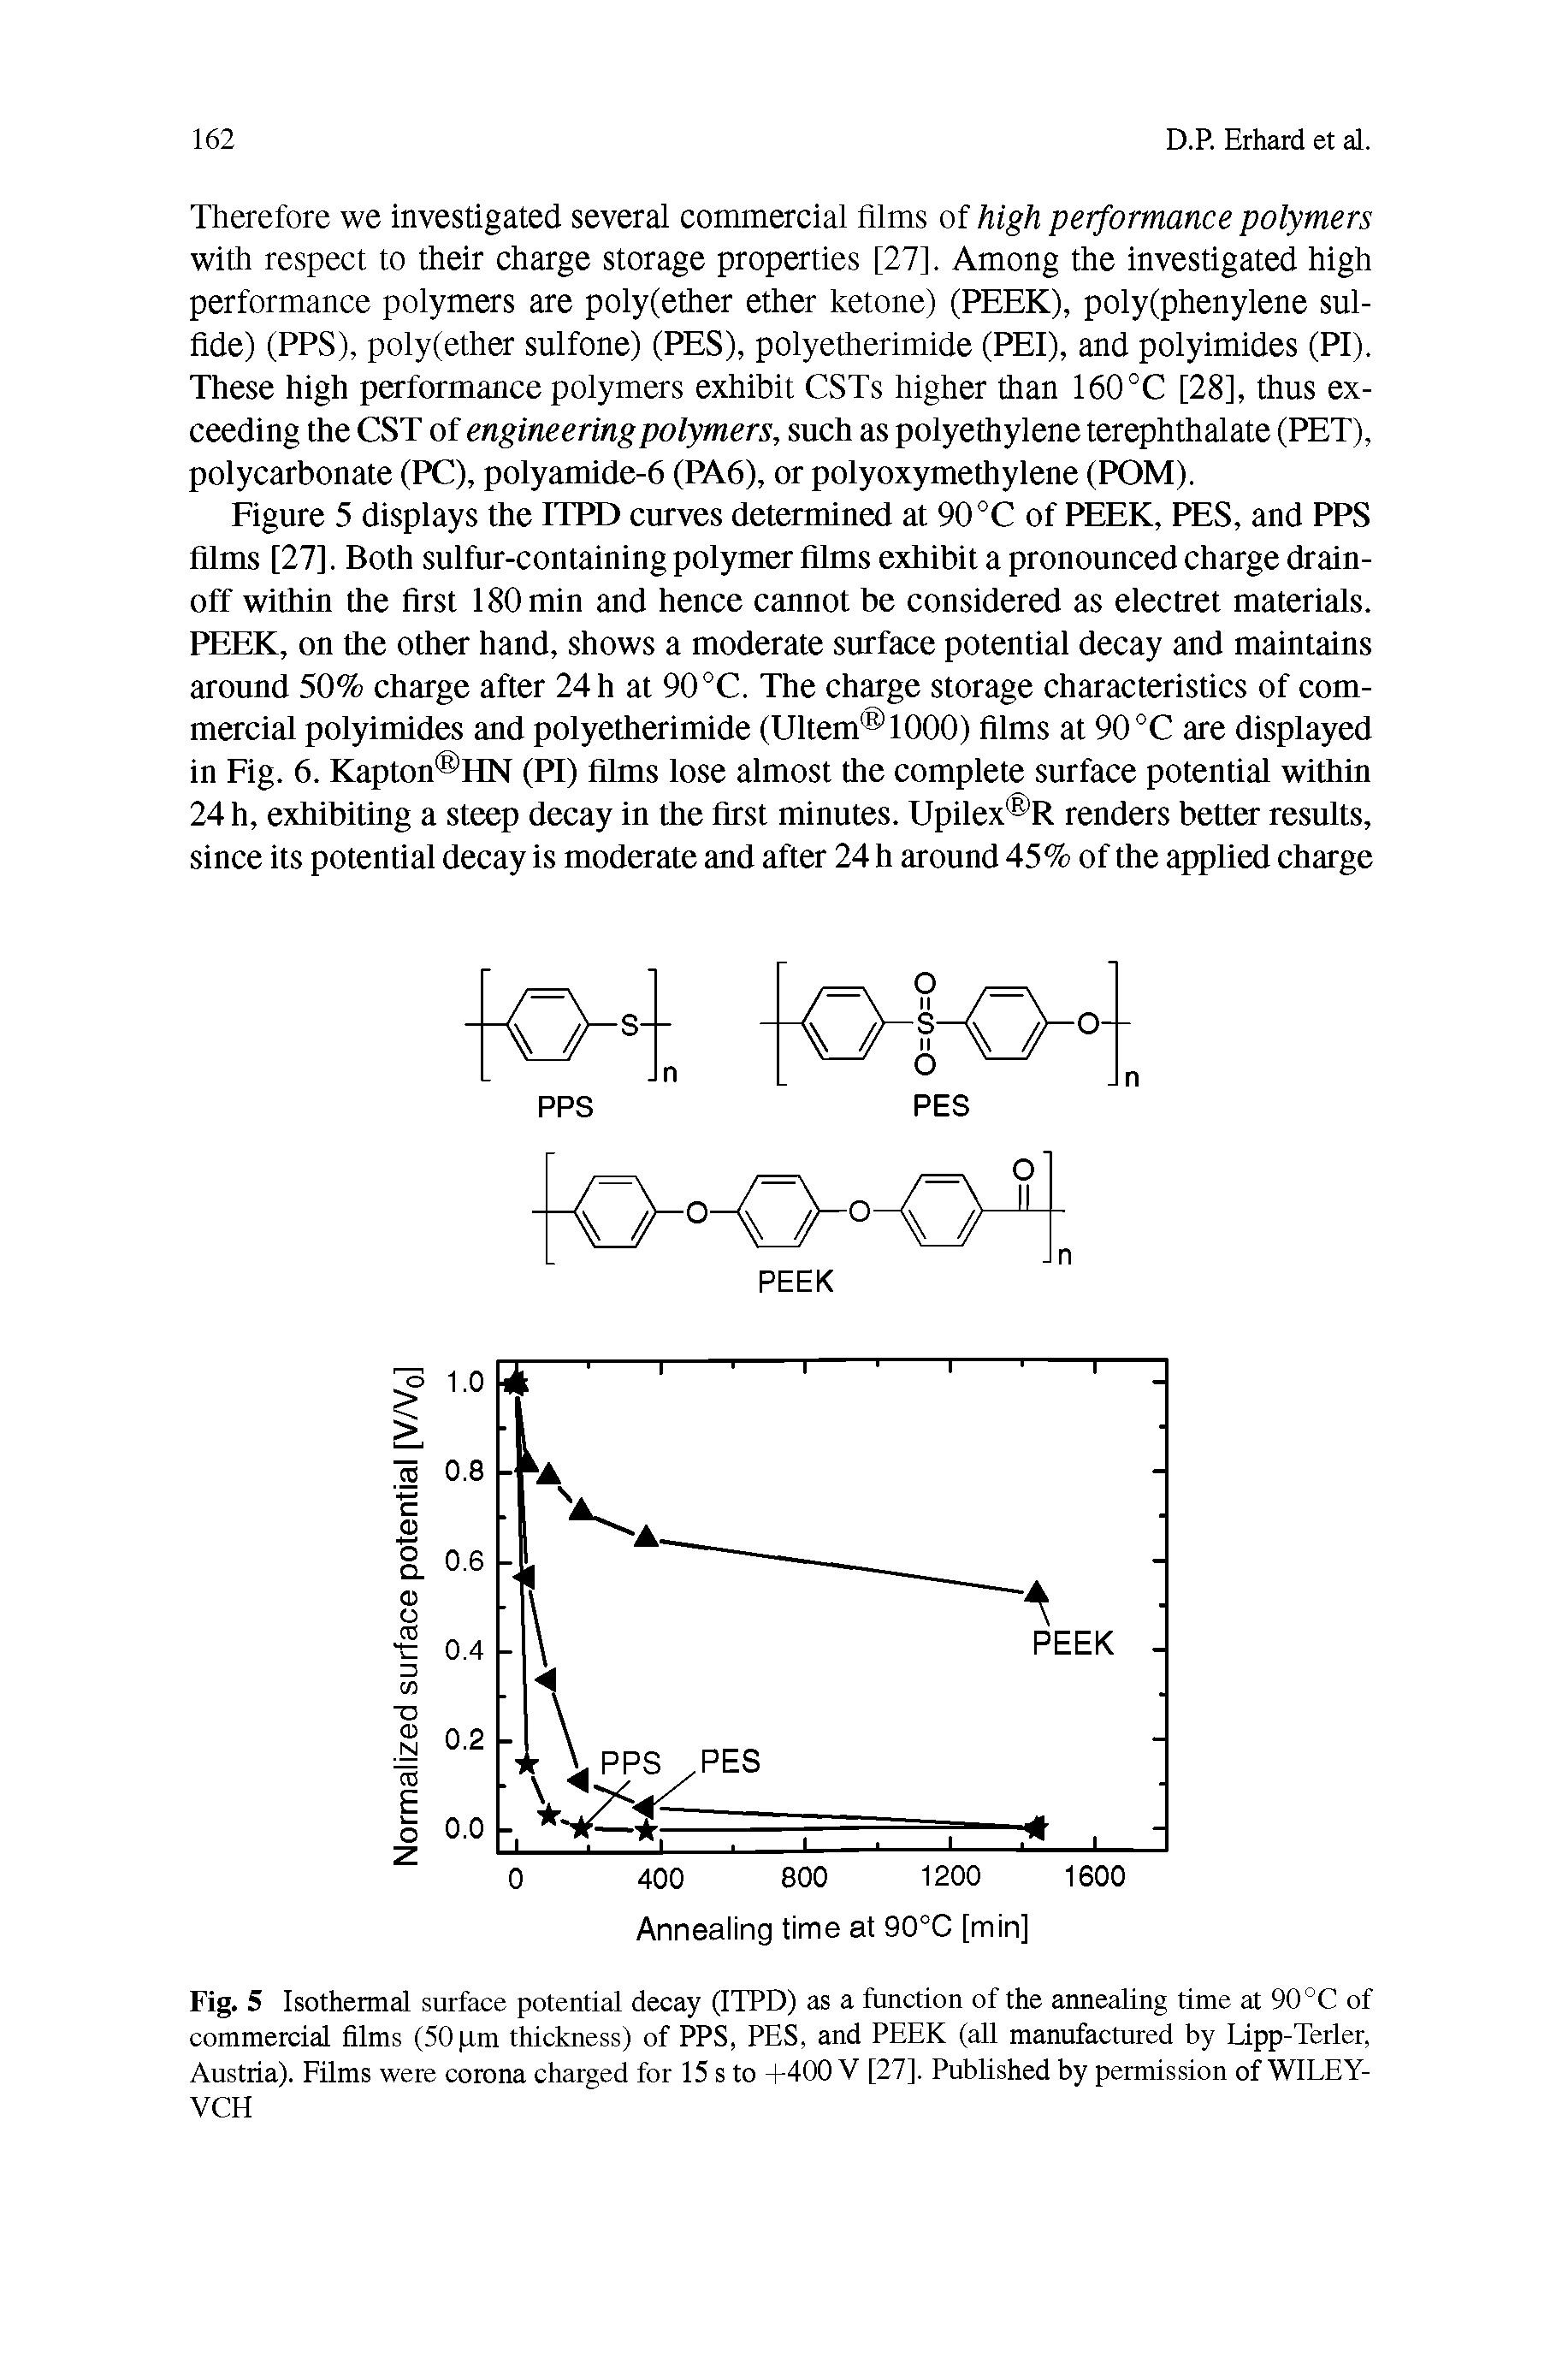 Figure 5 displays the ITPD curves determined at 90 °C of PEEK, PES, and PPS films [27]. Both sulfur-containing polymer films exhibit a pronounced charge drain-off within the first 180 min and hence cannot be considered as electret materials. PEEK, on the other hand, shows a moderate surface potential decay and maintains around 50% charge after 24 h at 90°C. The charge storage characteristics of commercial polyimides and polyetherimide (Ultem 1000) films at 90 °C are displayed in Fig. 6. Kapton HN (PI) films lose almost the complete surface potential within 24 h, exhibiting a steep decay in the first minutes. Upilex R renders better results, since its potential decay is moderate and after 24 h around 45% of the applied charge...